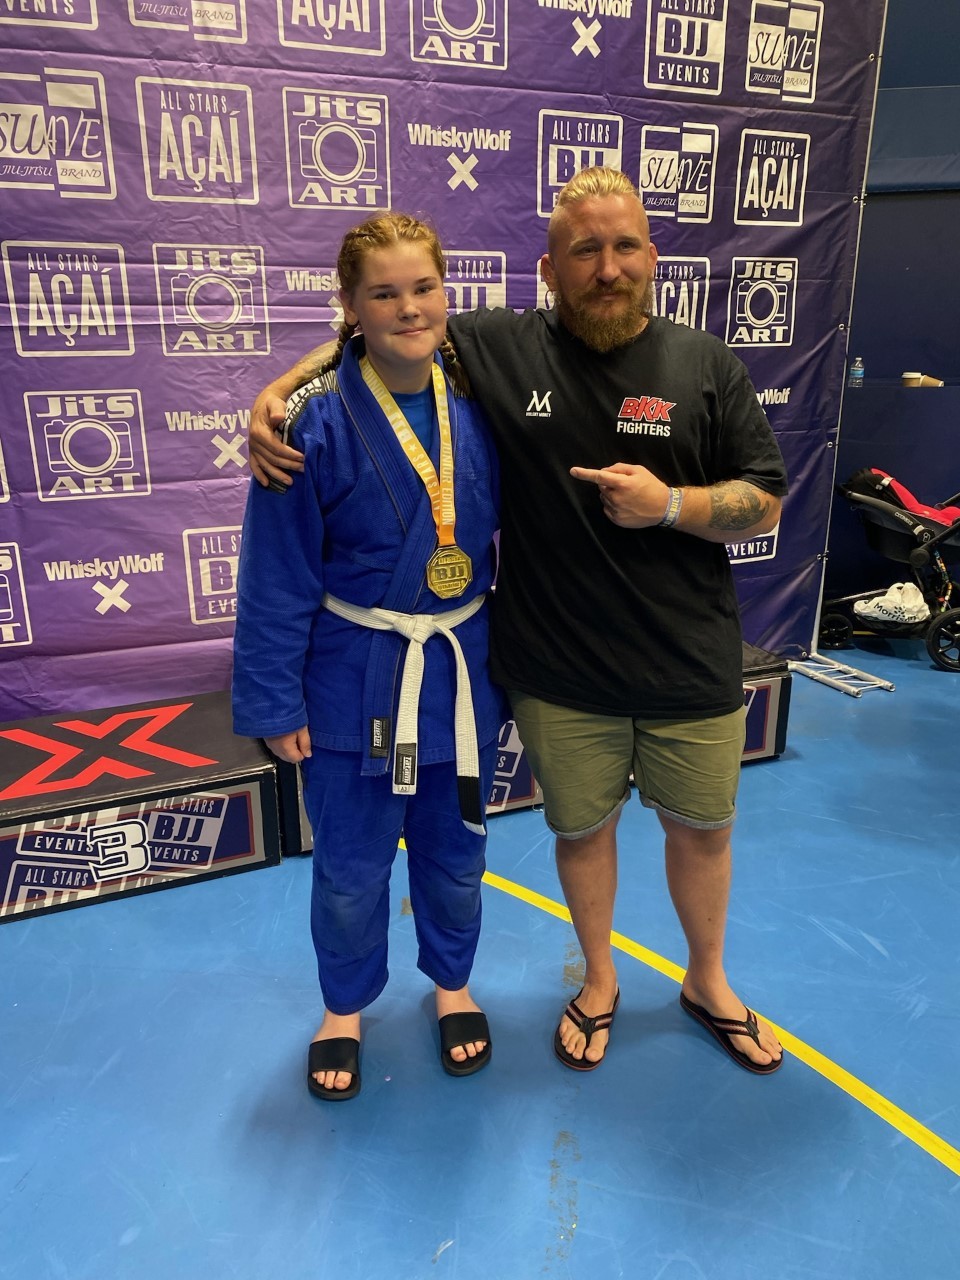 Number one – Gracie is adding to her medal haul in a varity of sports